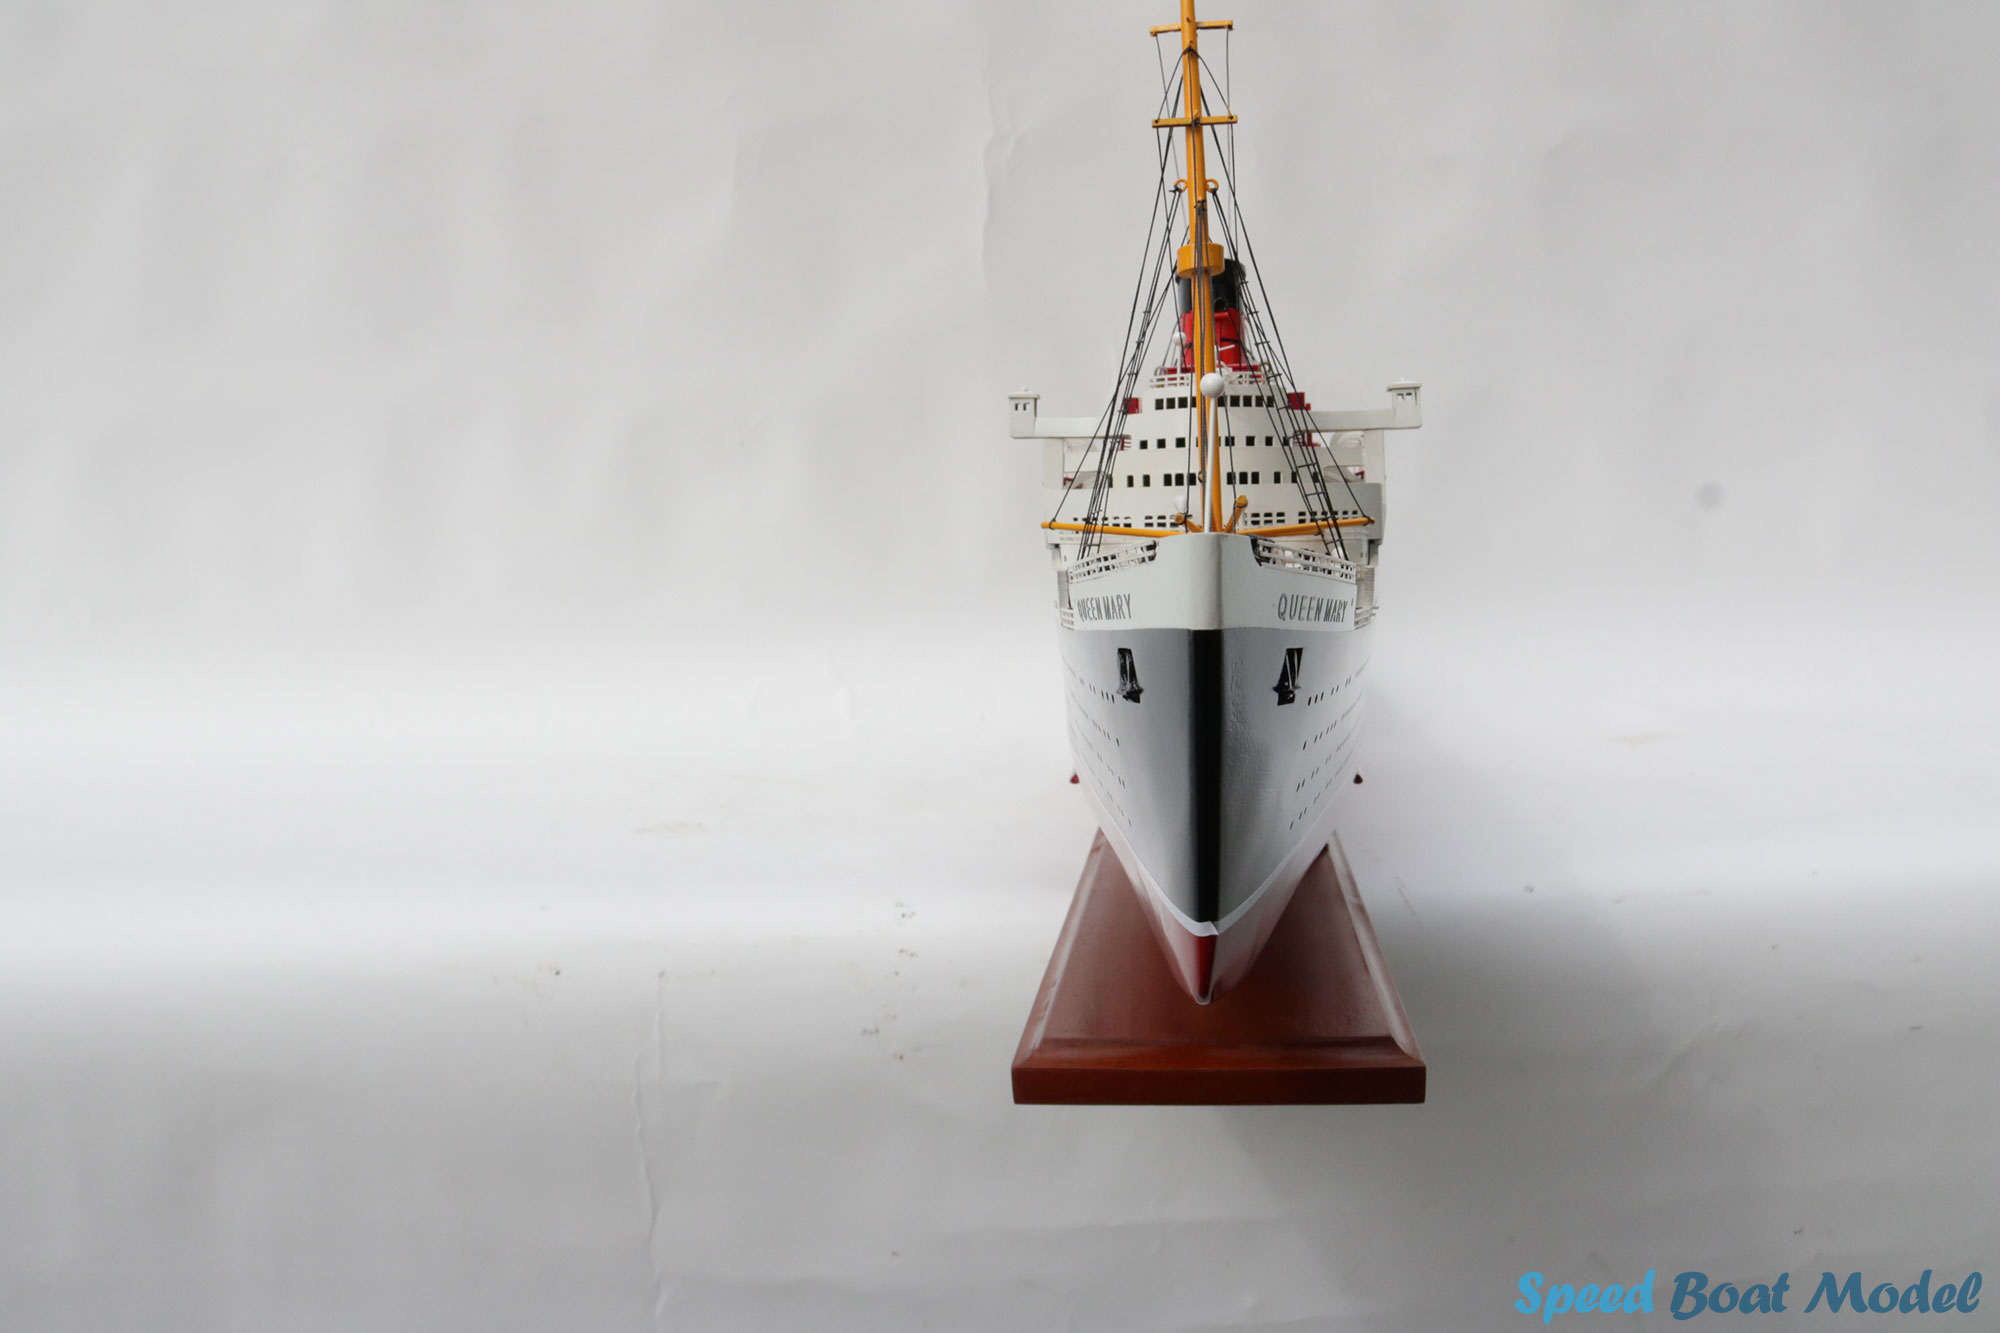 Rms Queen Mary Painted Cruise Liner Model 39.3"